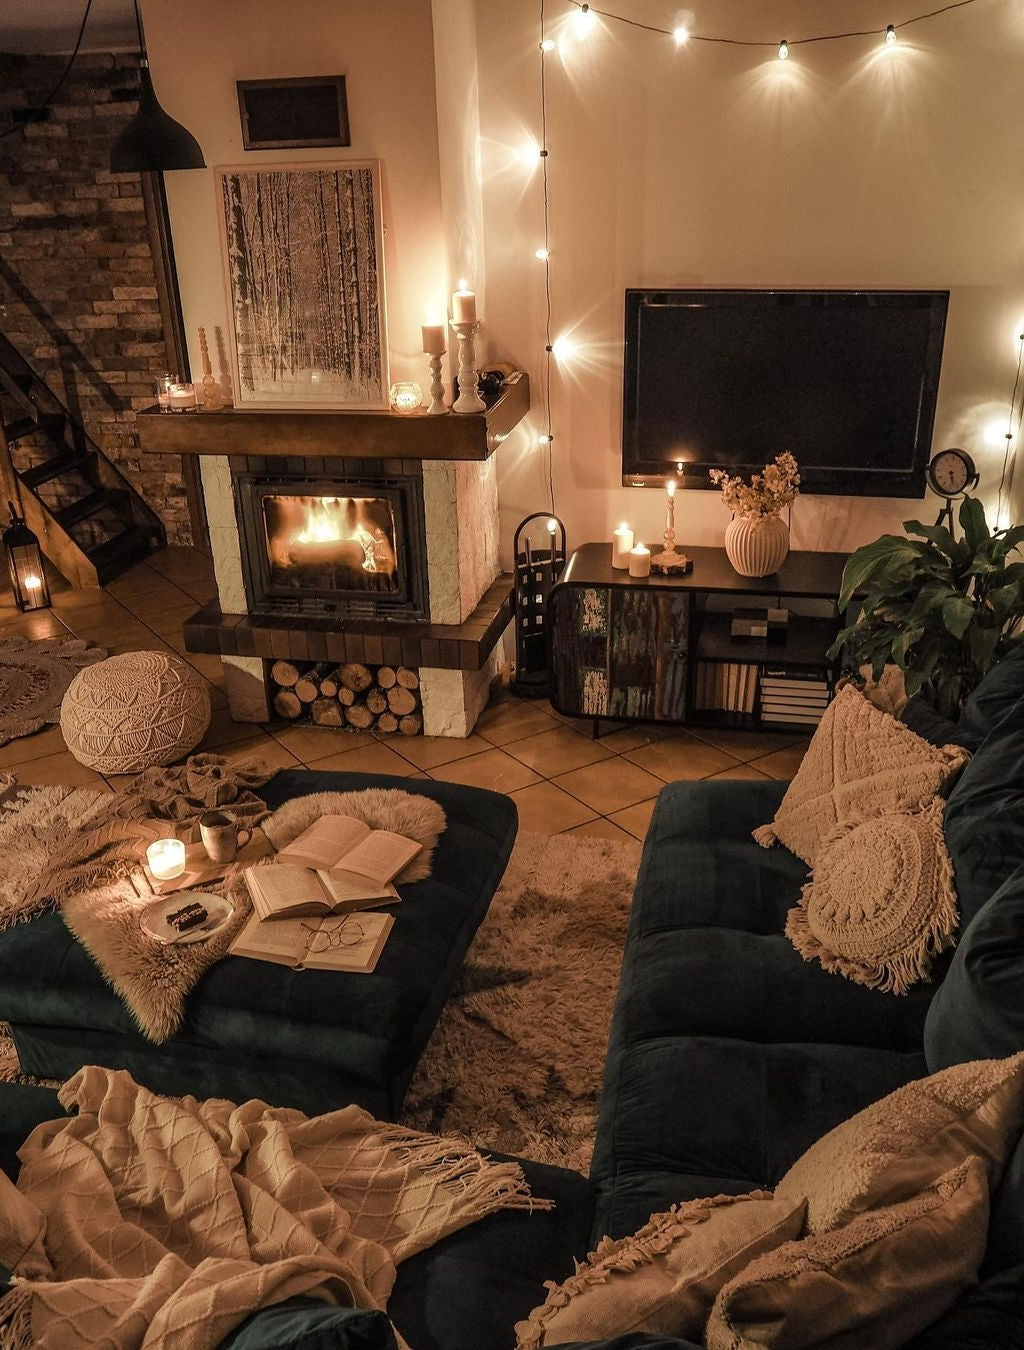 3 Ways to Sustainably Cozy Up Your Home for the Holidays